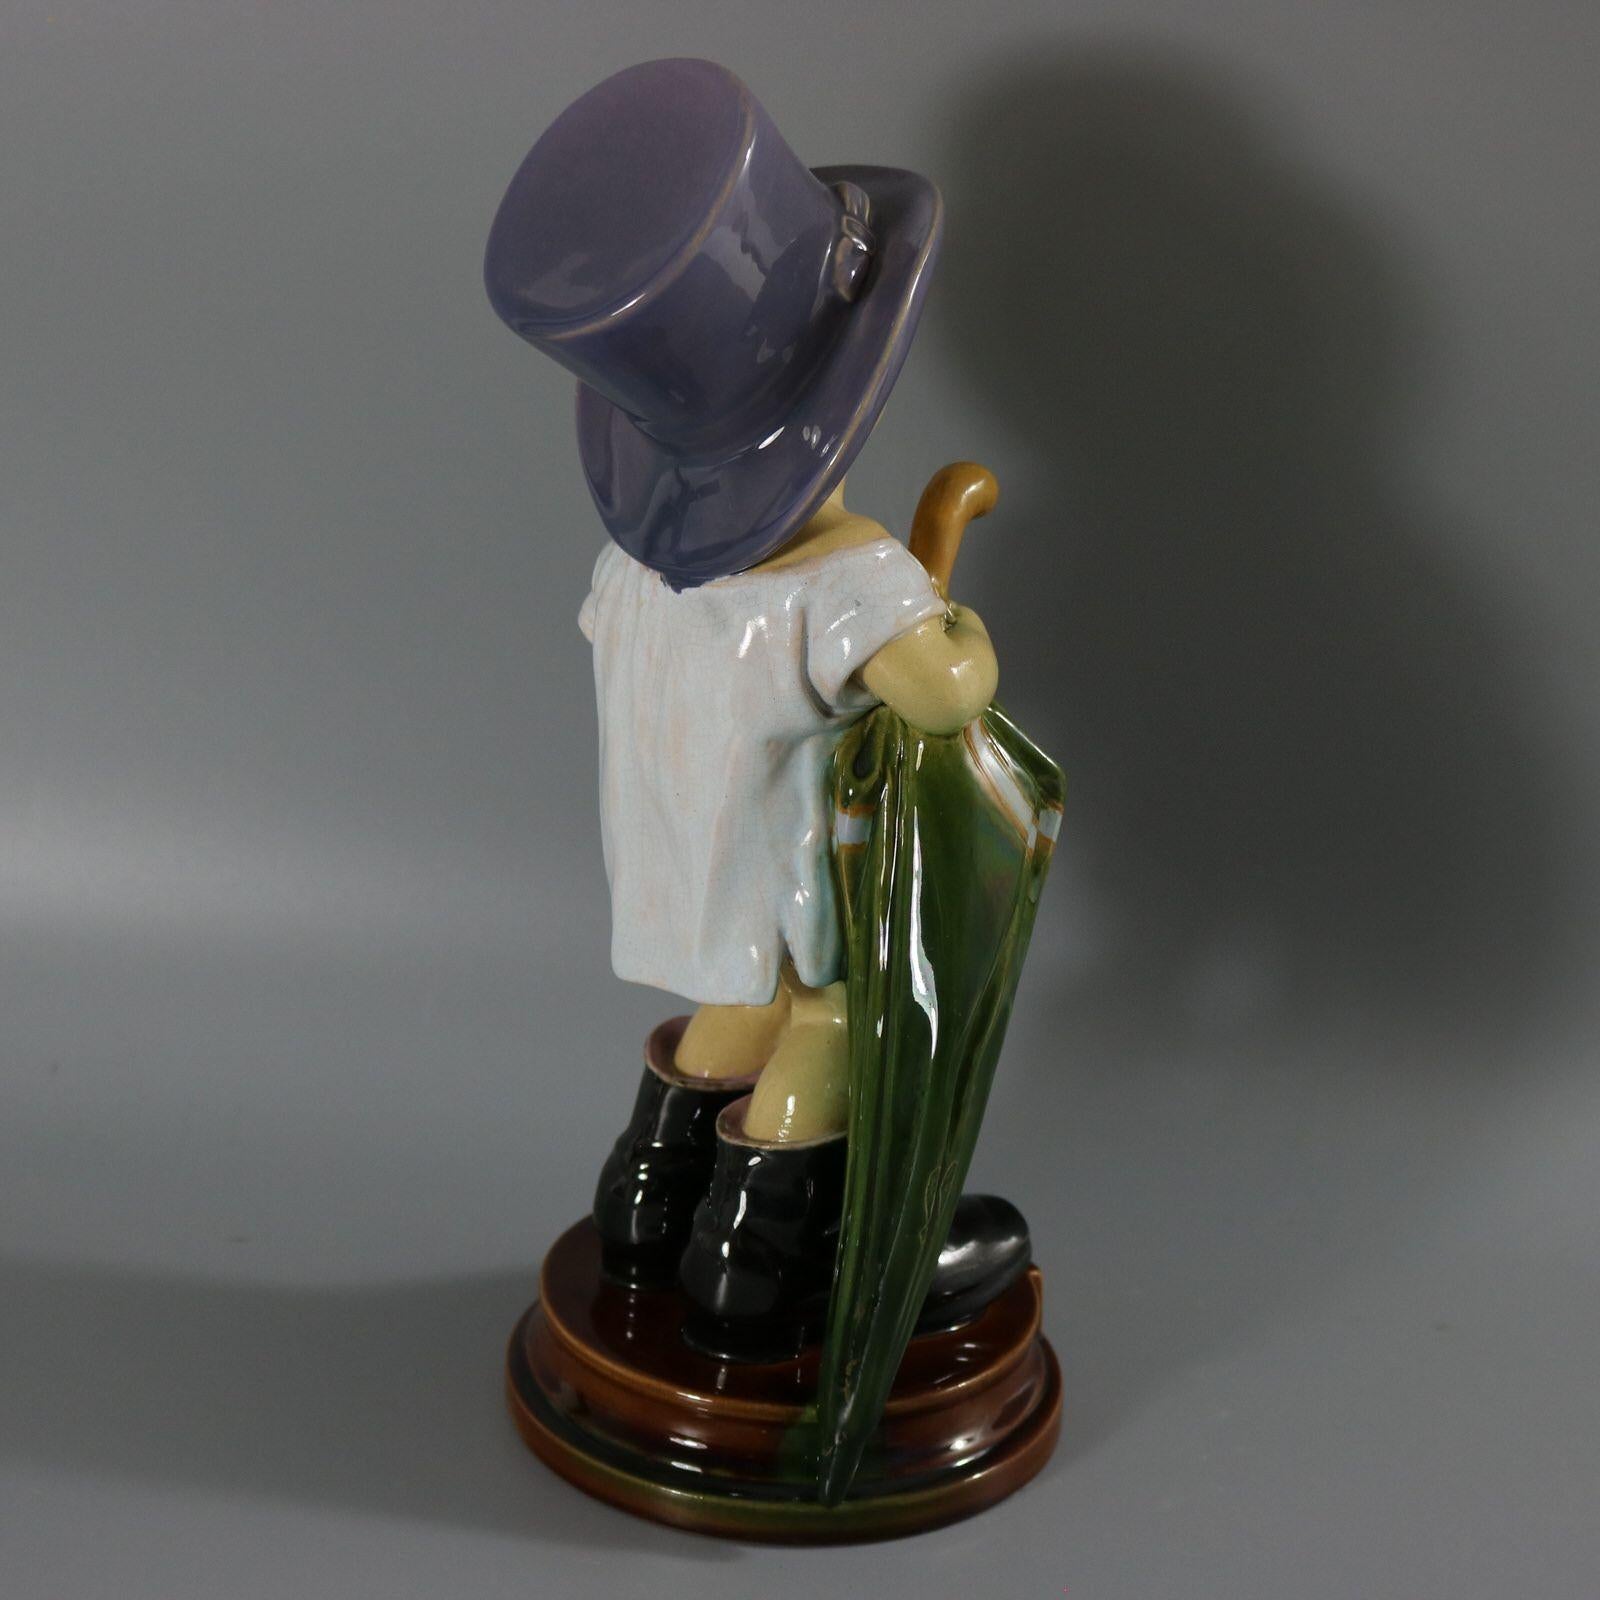 Brownfield Majolica Figure of a Child, Titled PAPA For Sale 2